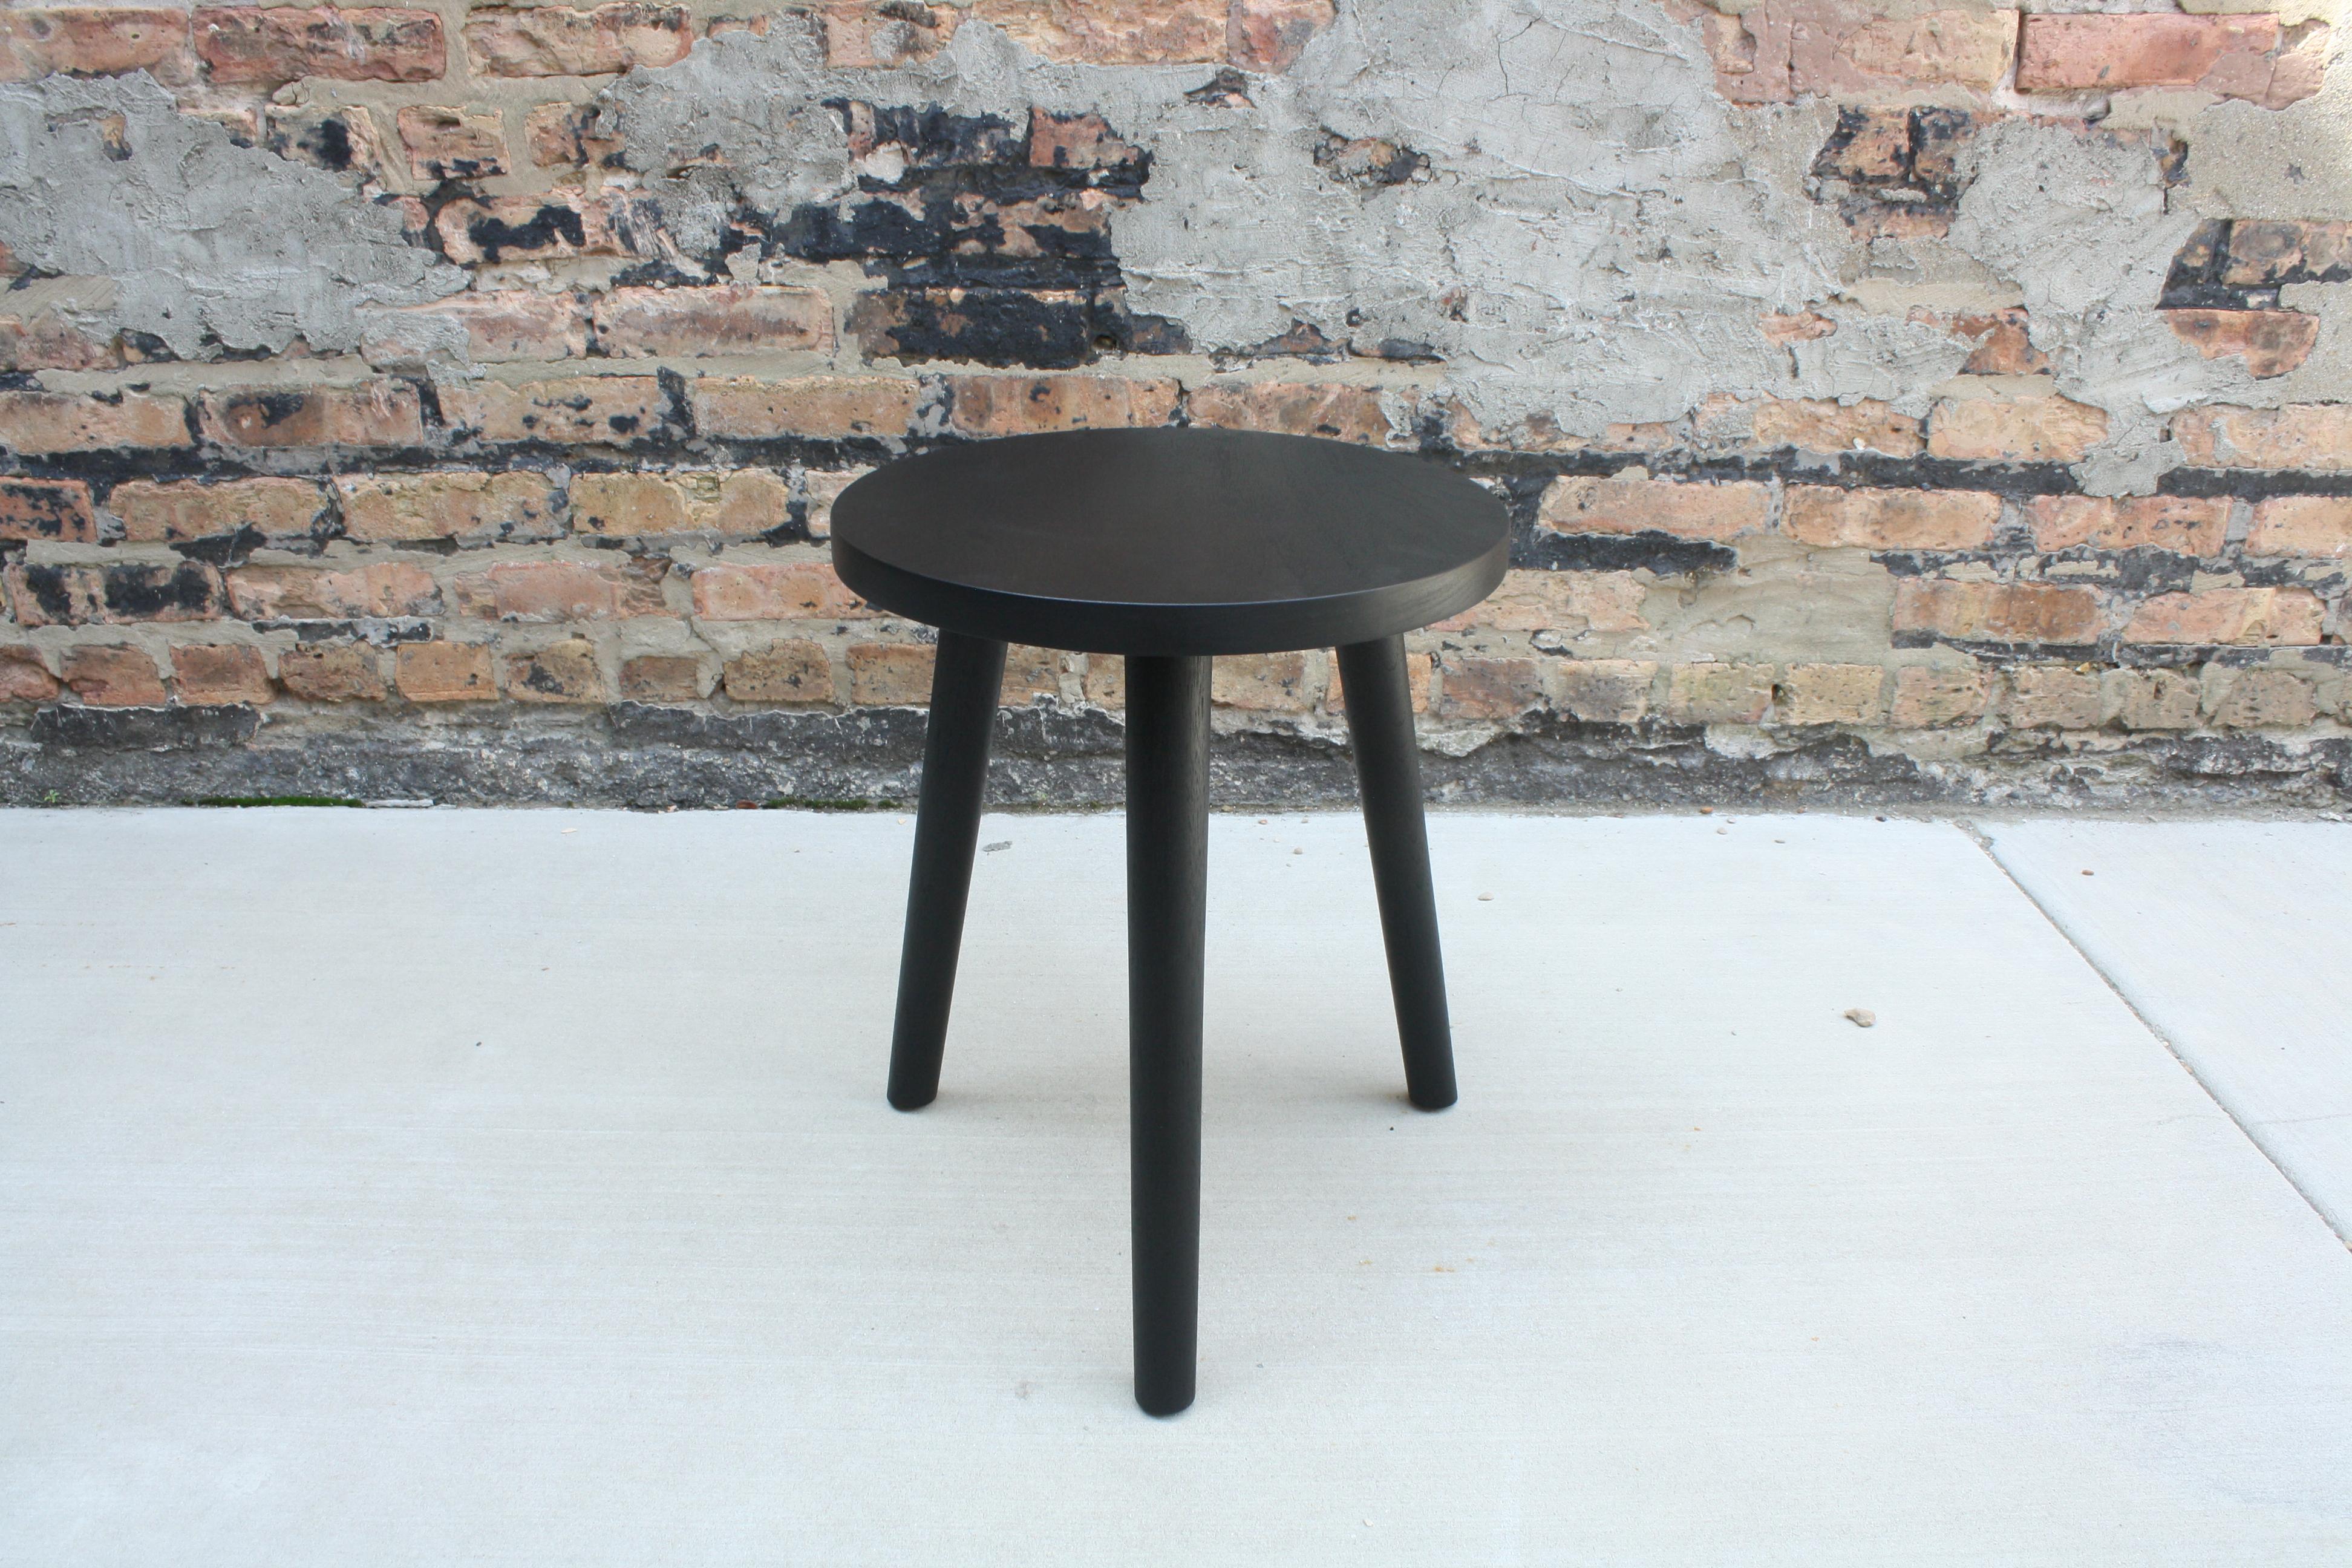 Shown in ebonized walnut and natural cherry

This solid wood side table features hand-turned, tapered legs joined to a simple, under-beveled round top with wedged through tenon joinery. Simplicity in design and construction emphasizes wood grain and